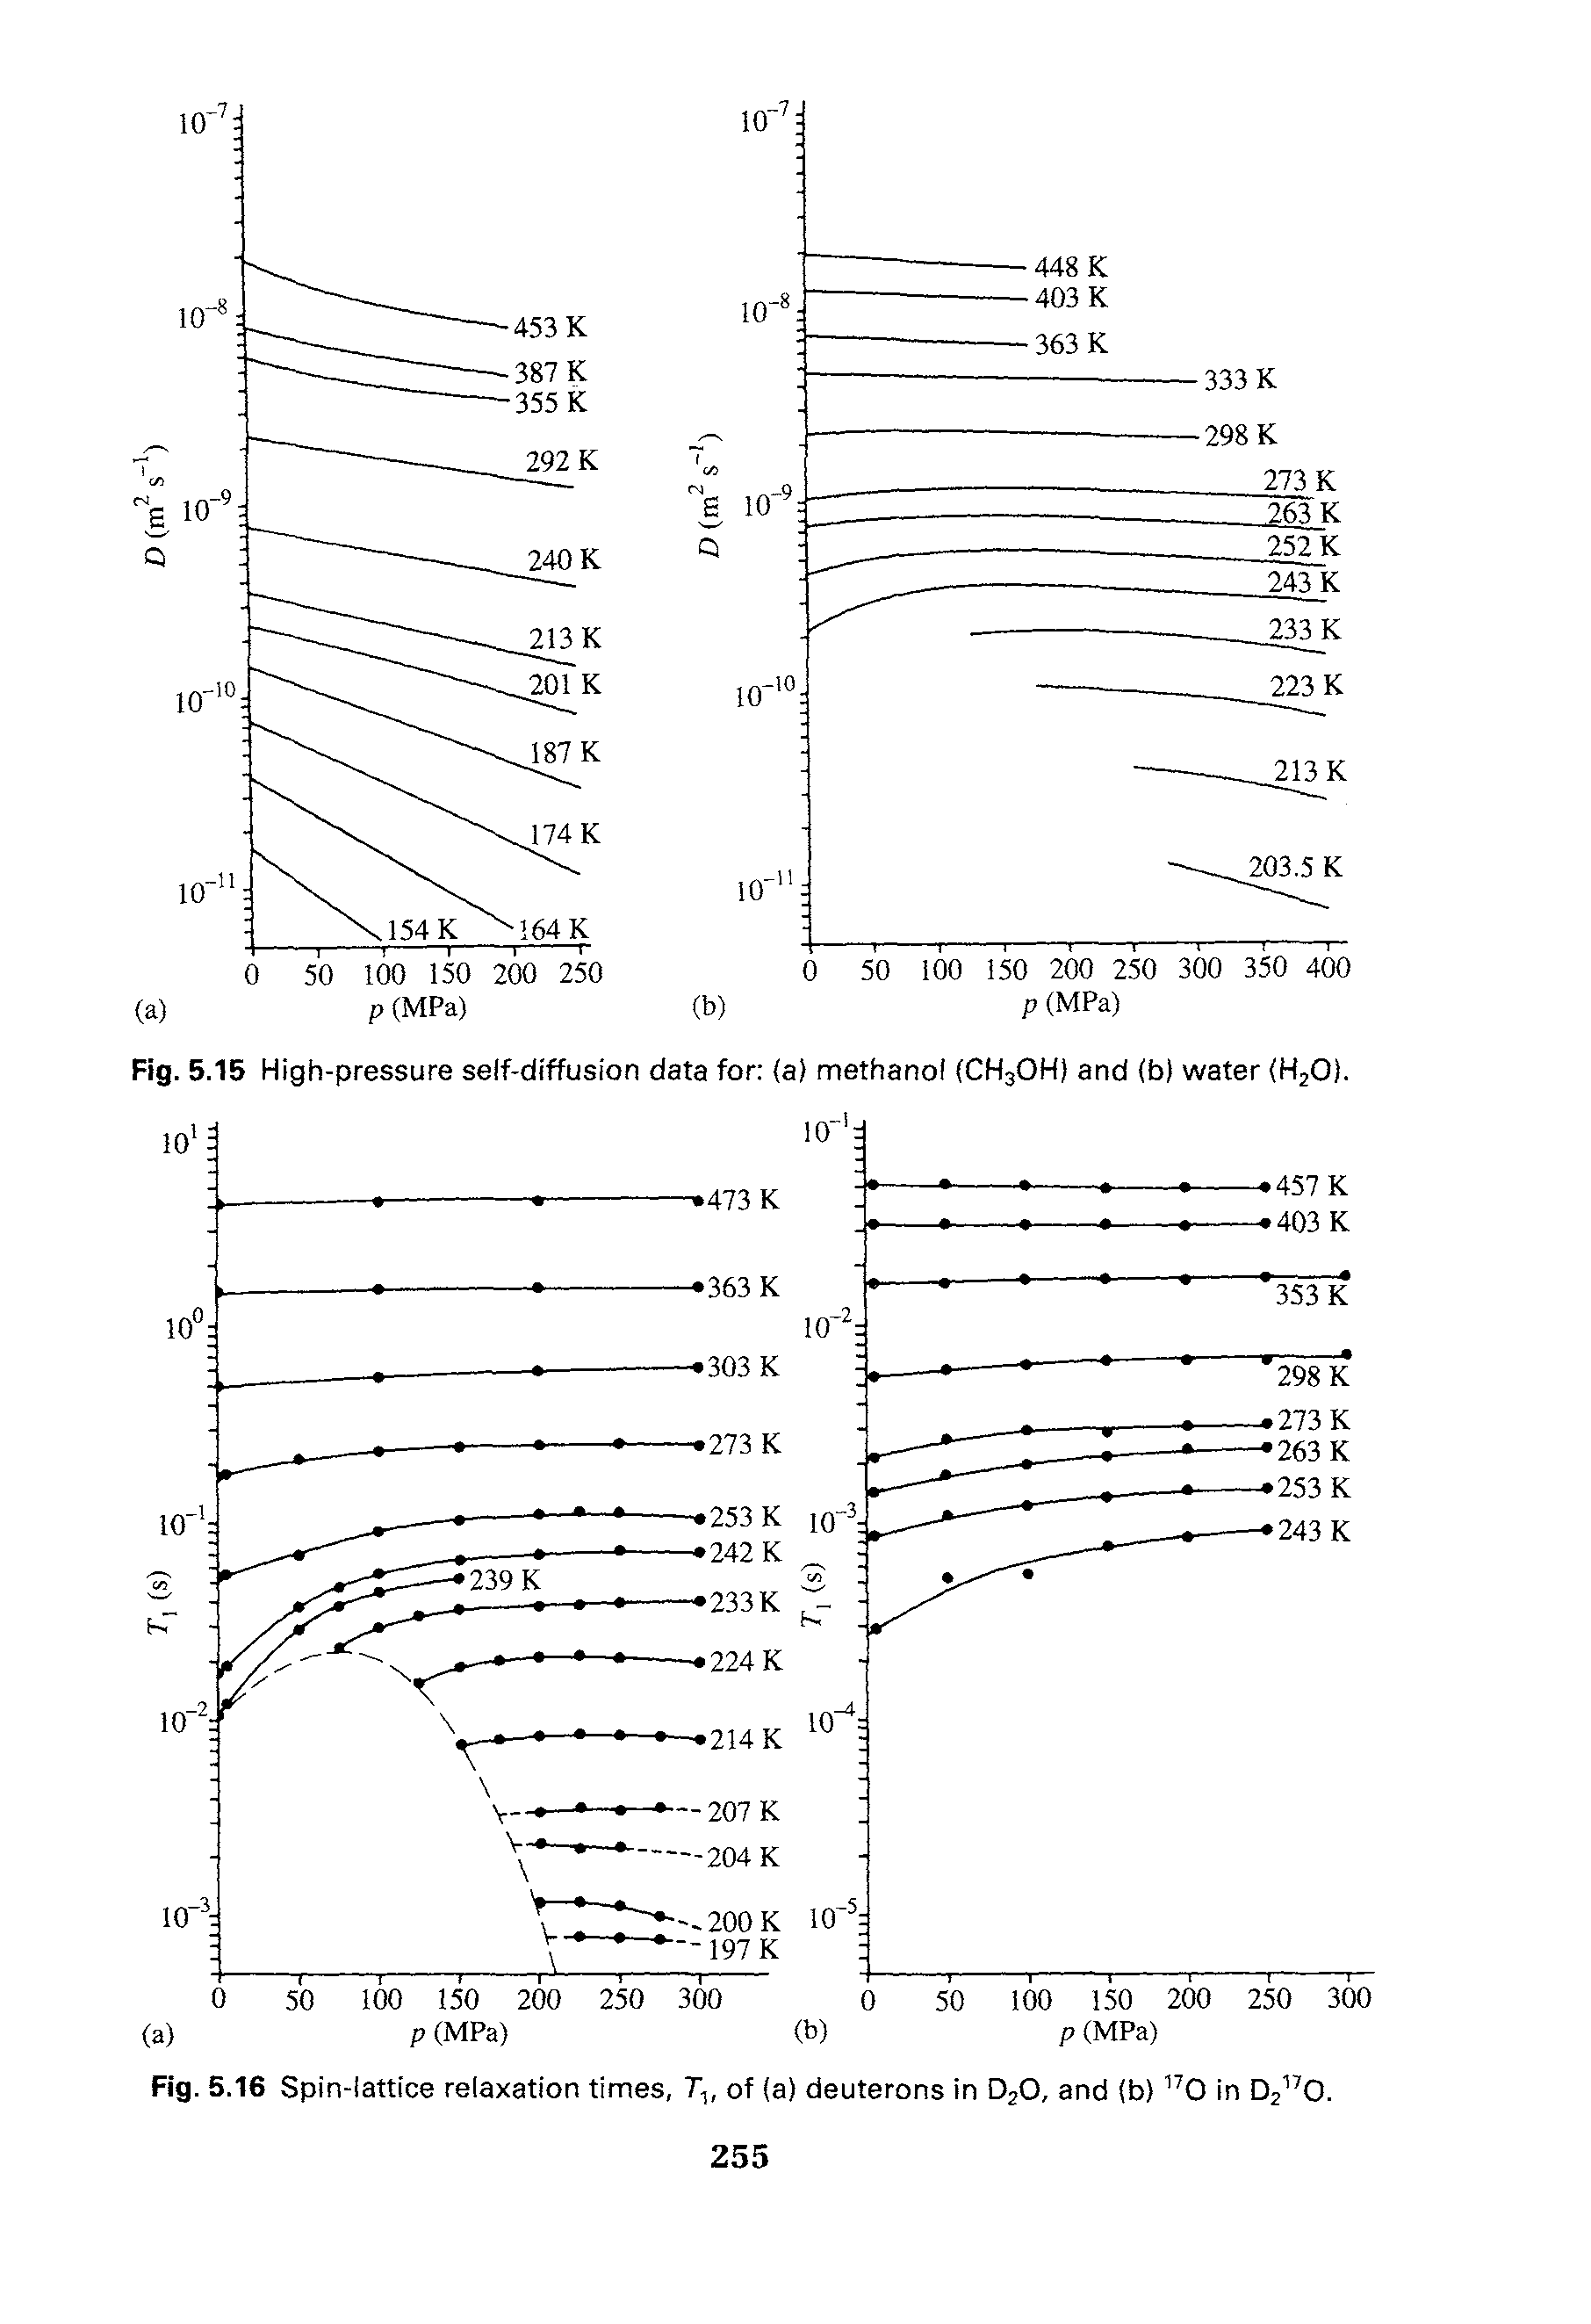 Fig. 5.15 High-pressure self-diffusion data for (a) methanol (CH3OH) and (b) water (HjO).